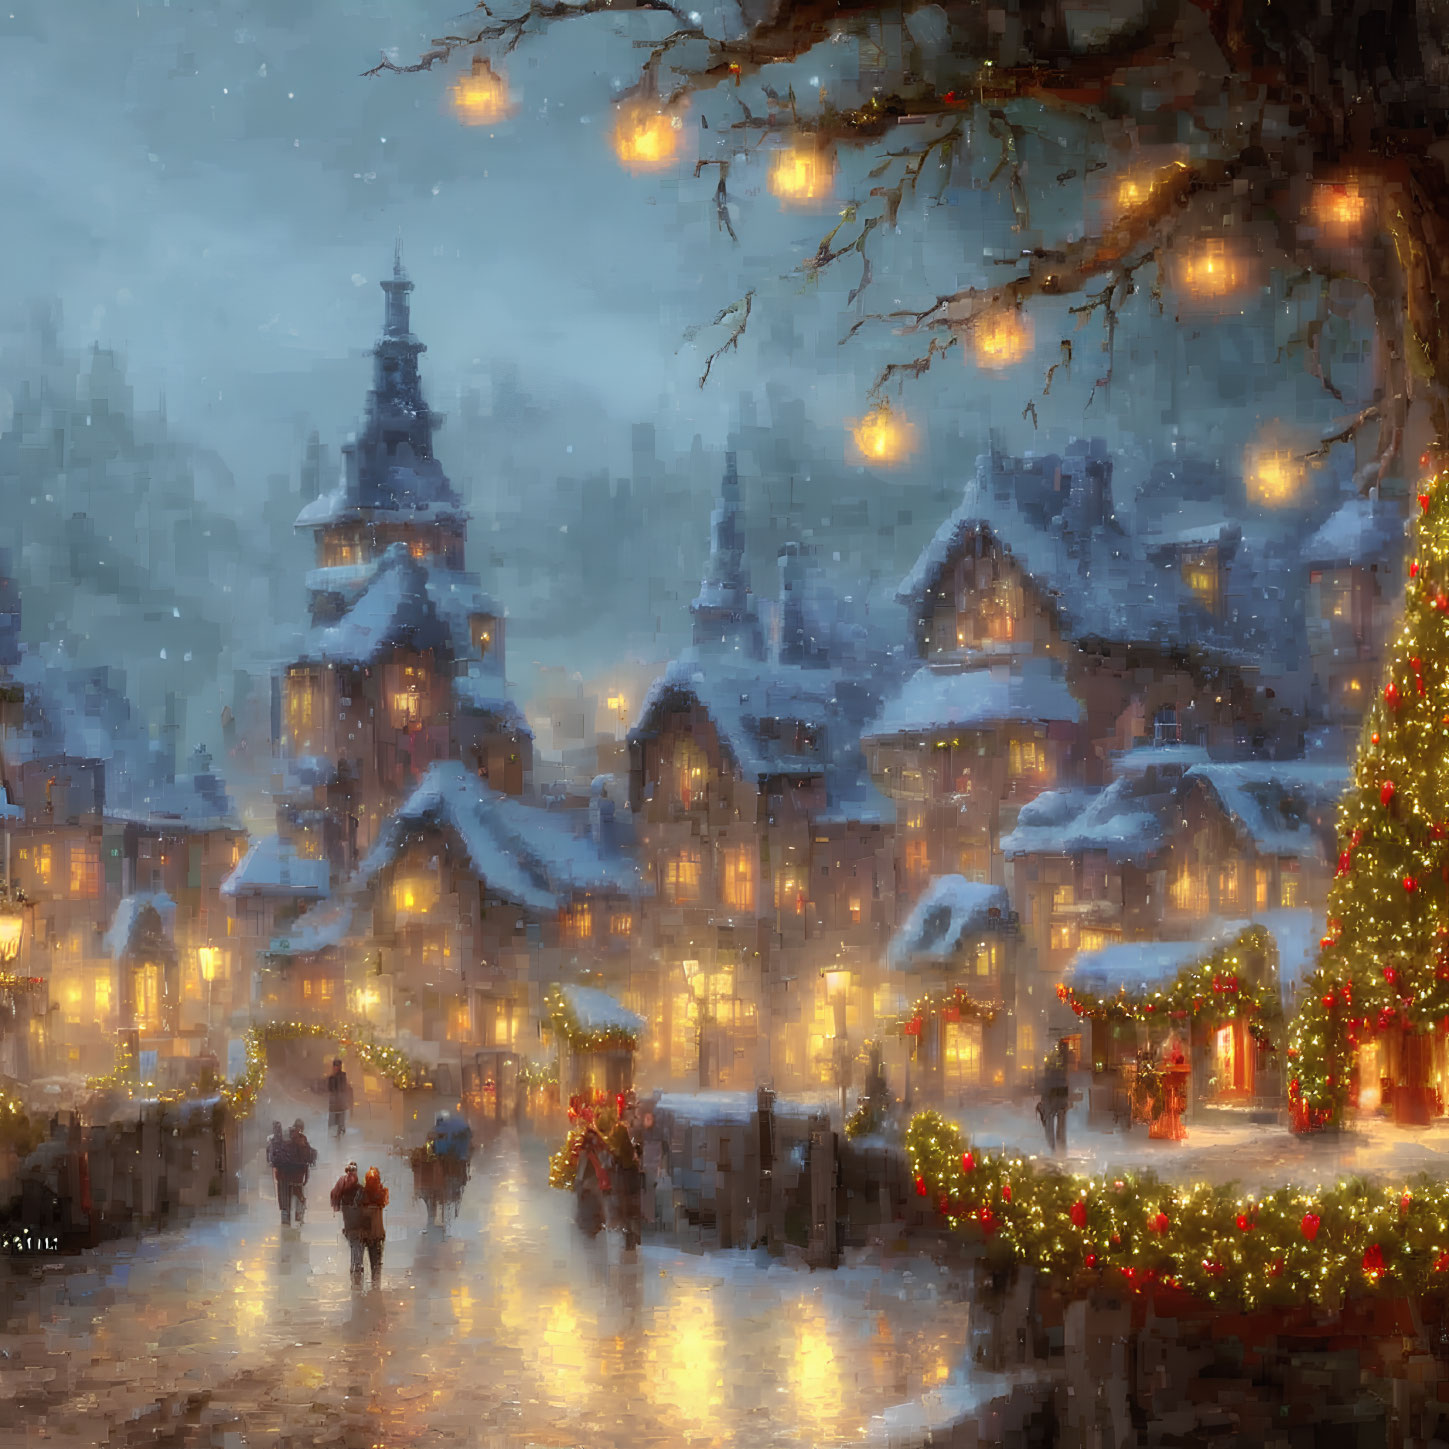 Snow-covered Christmas village with glowing decorations and festive atmosphere